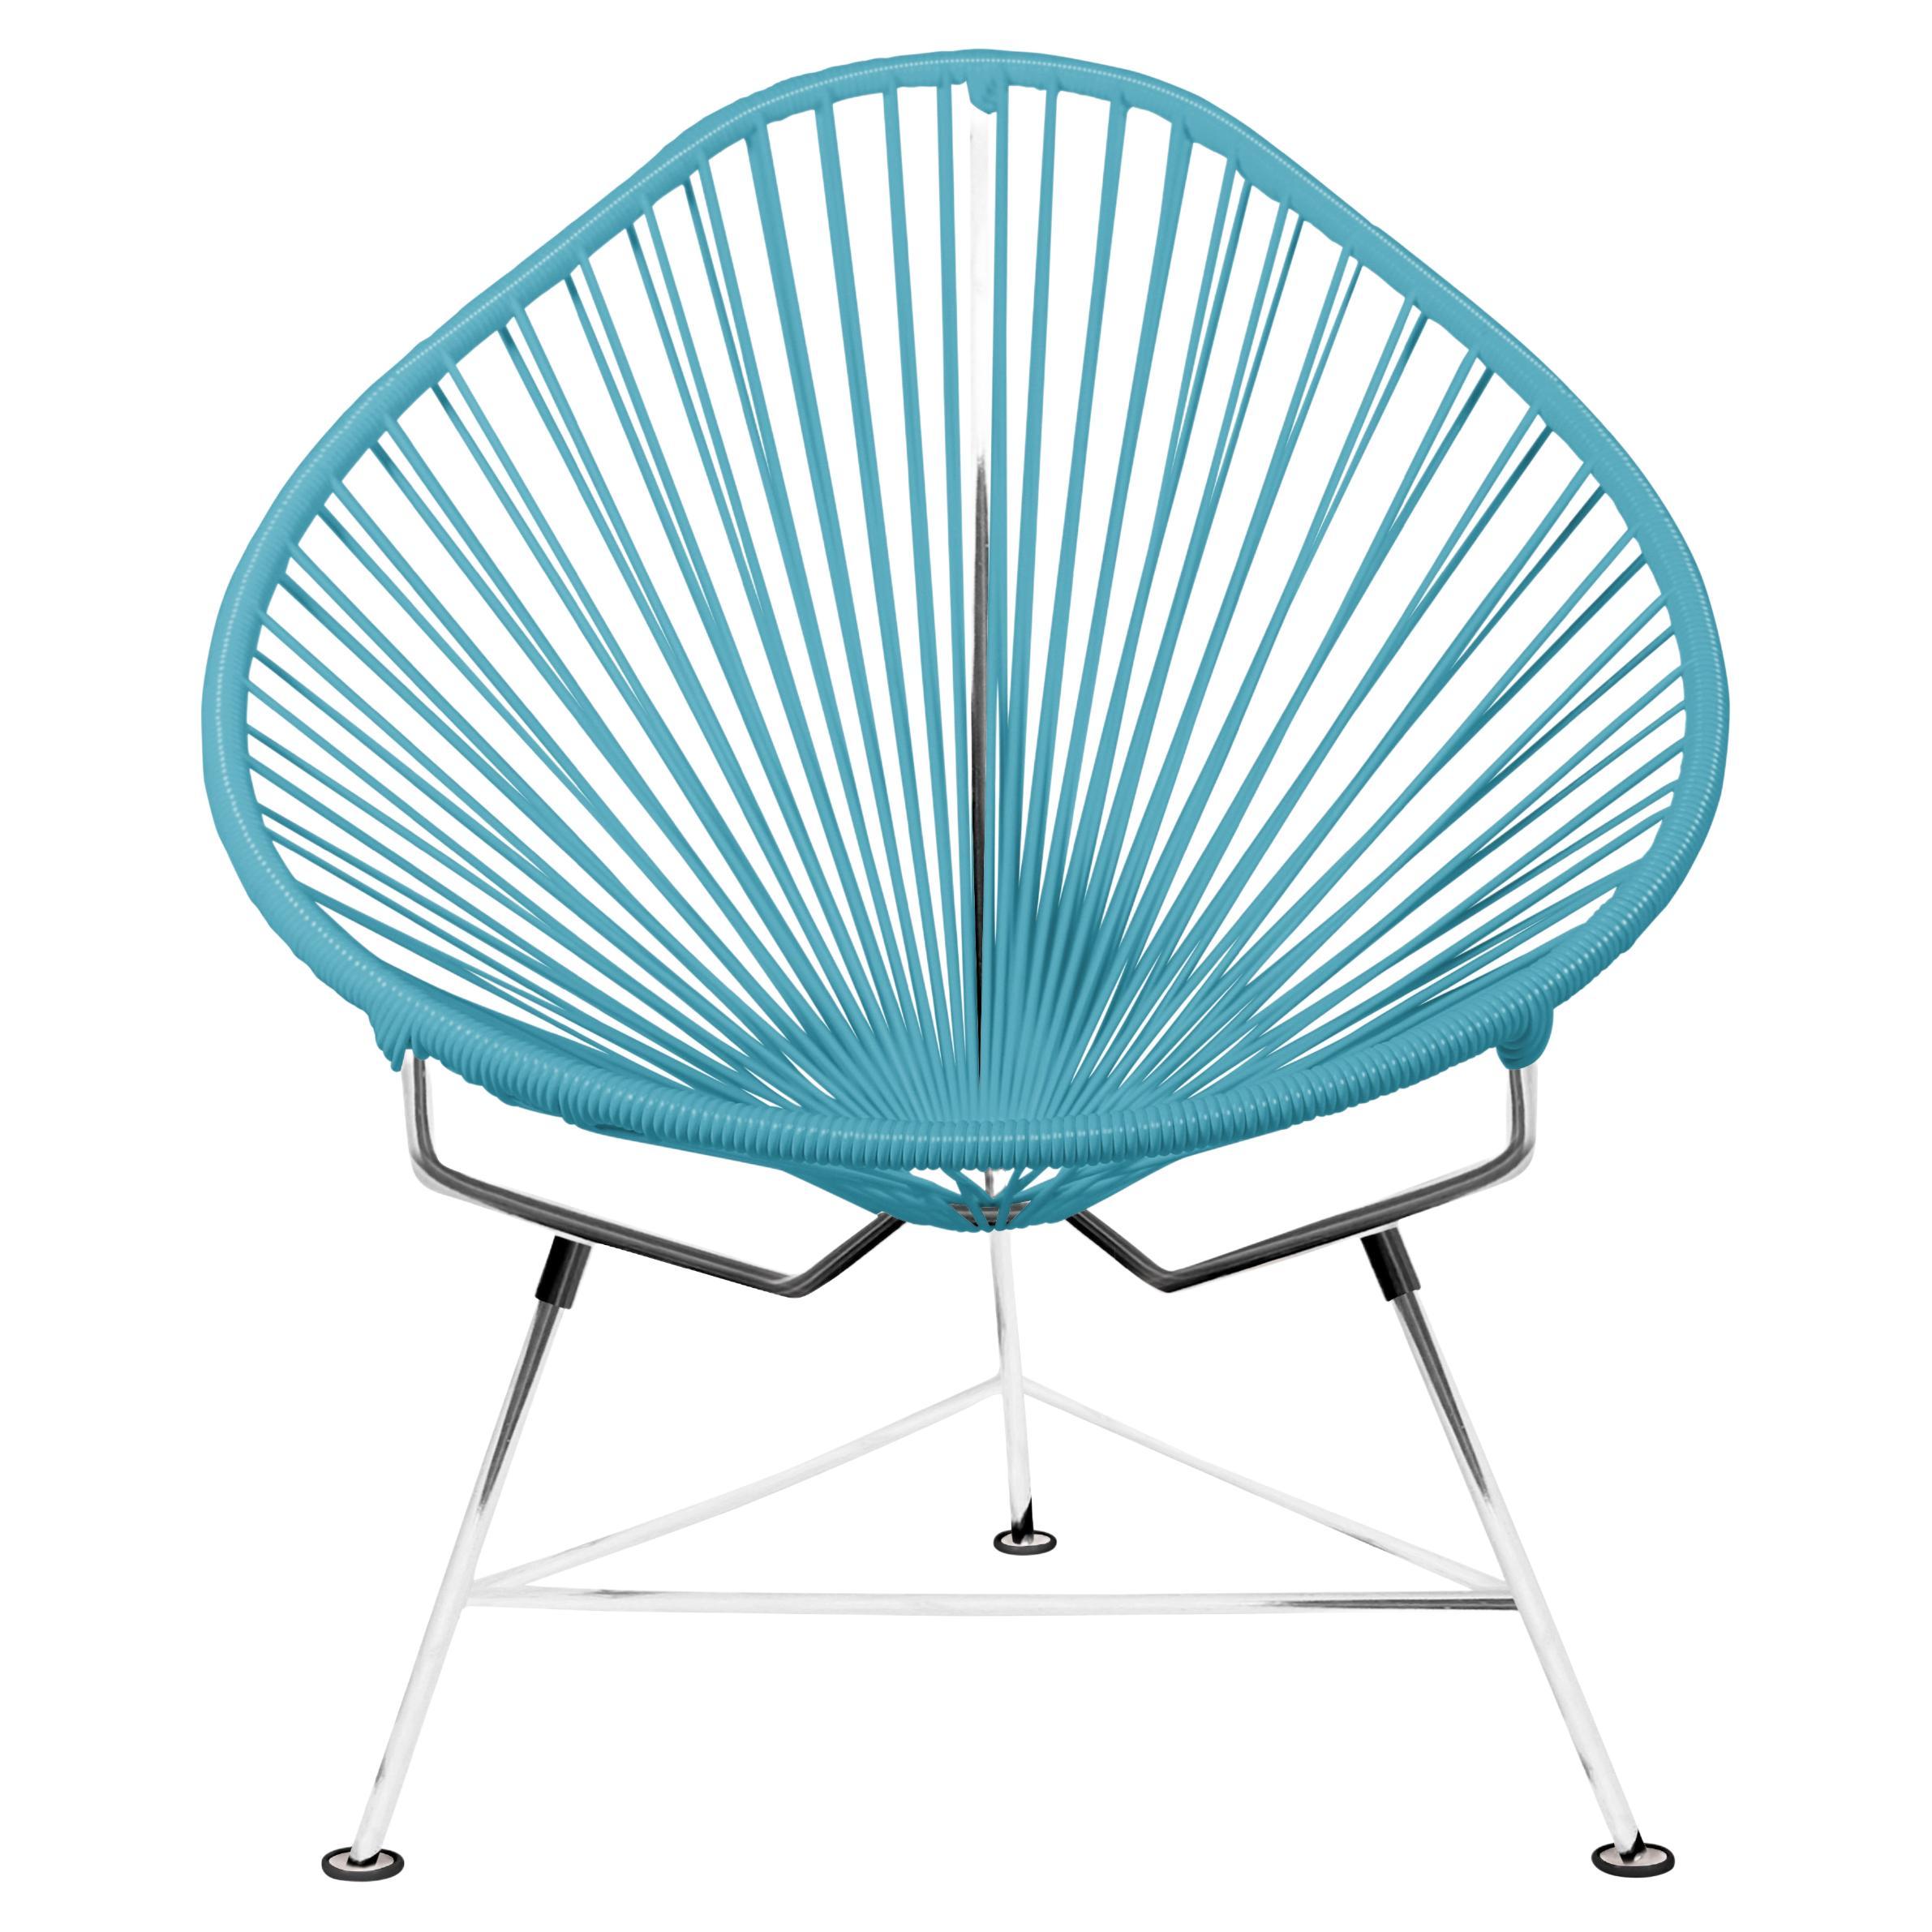 Innit Designs Acapulco Chair Blue Weave on Chrome Frame